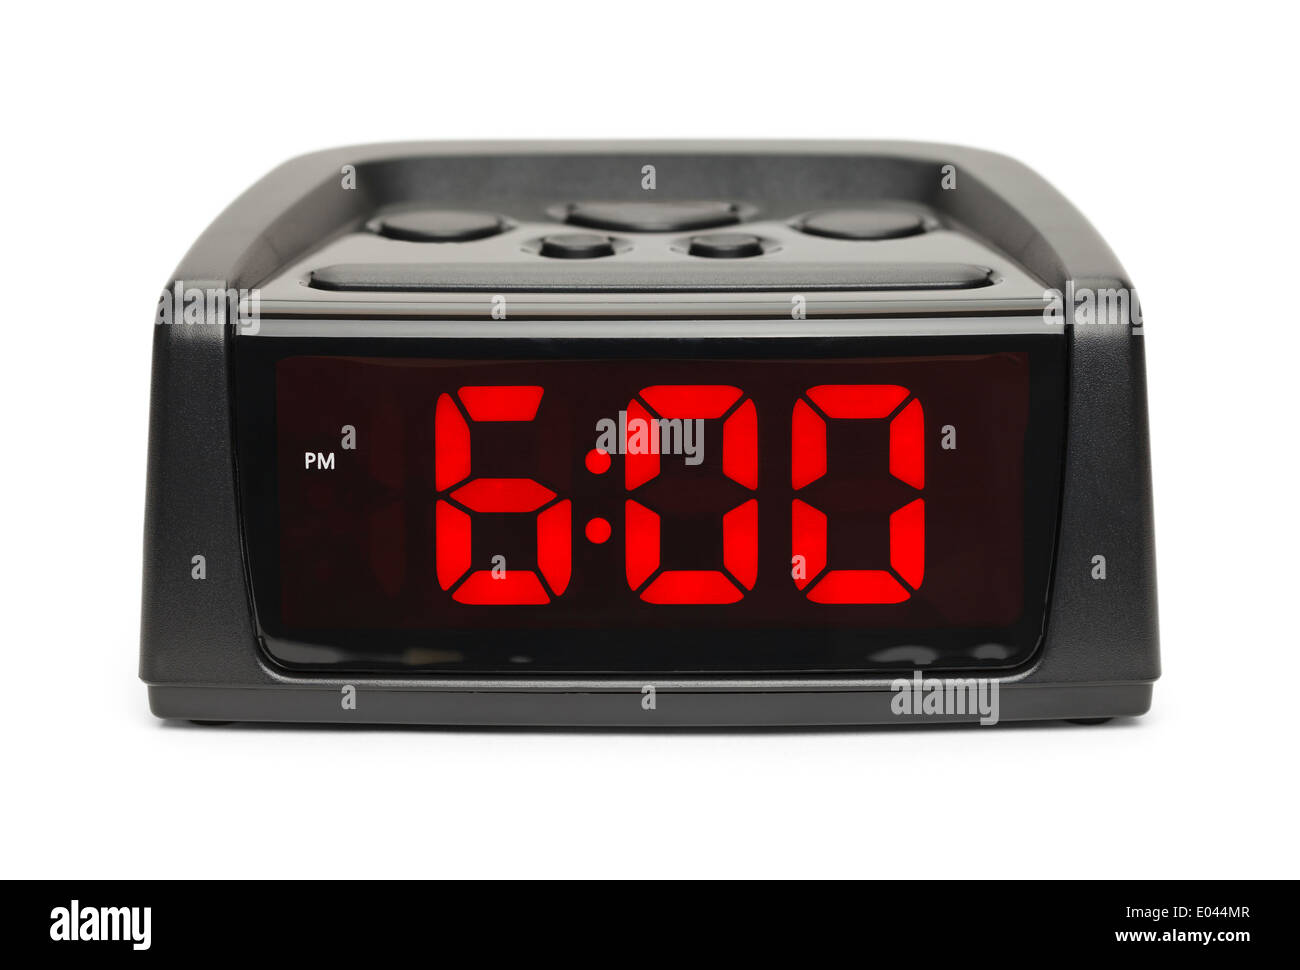 Black Plastic Alarm Clock With Red Display Isolated on White Background. Stock Photo